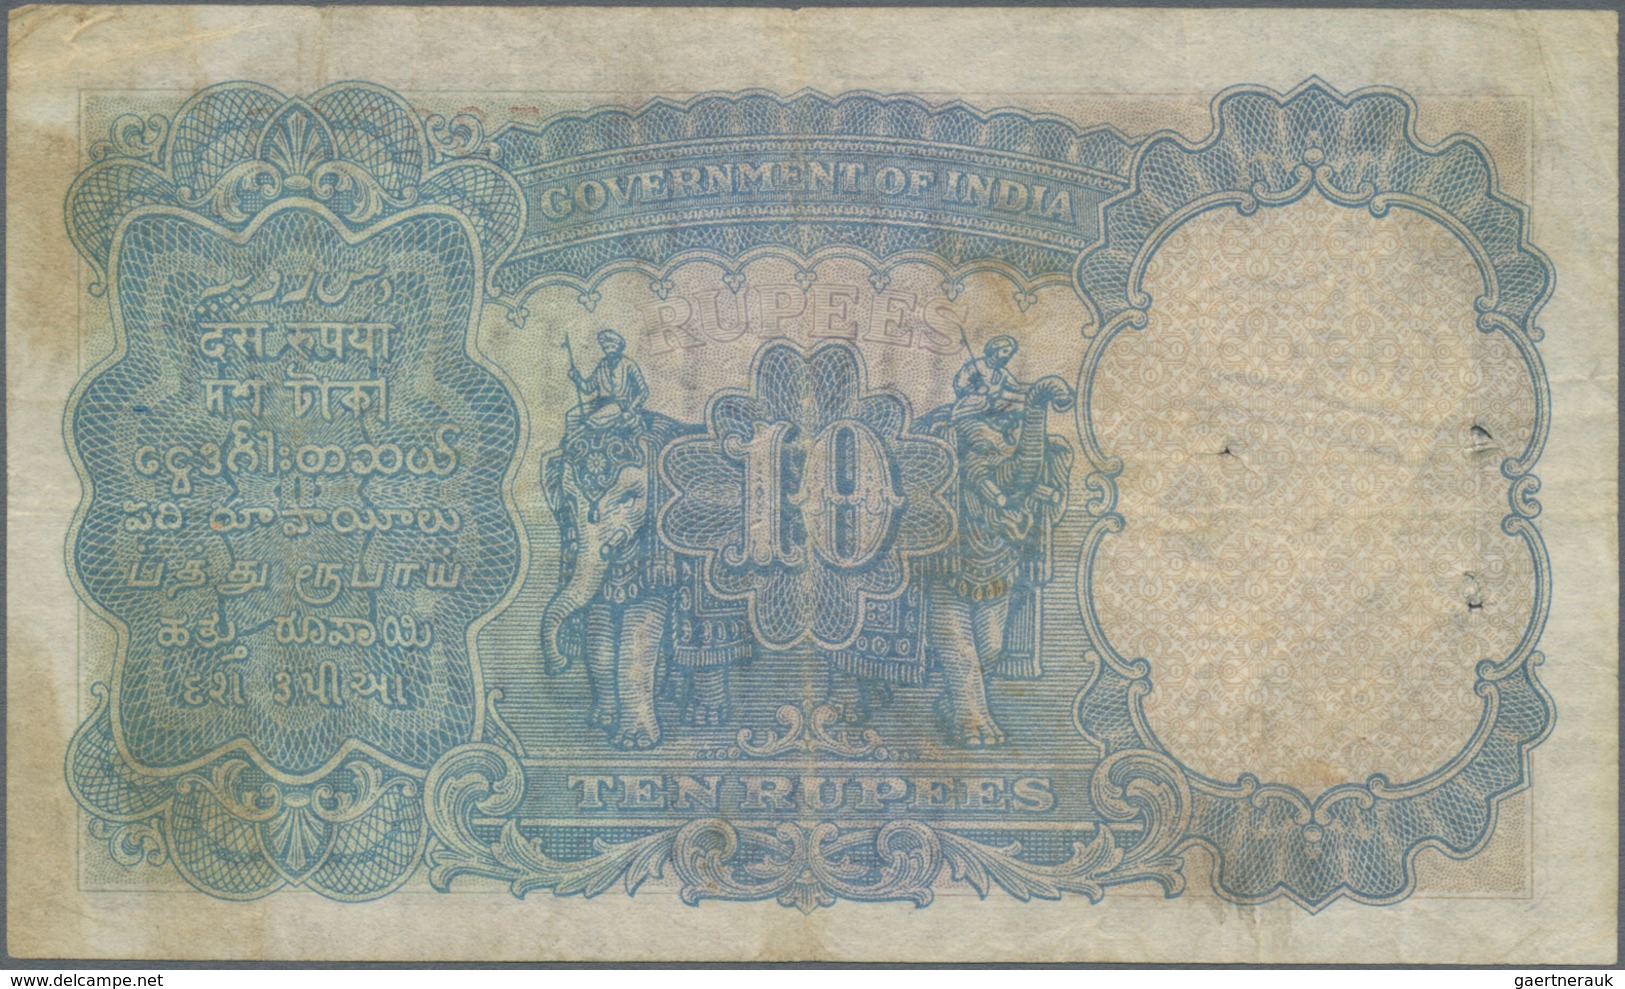 India / Indien: 10 Rupees ND Sign. Taylor, Portrait KGV P. 16a, Used With Several Folds In Paper, So - Indien